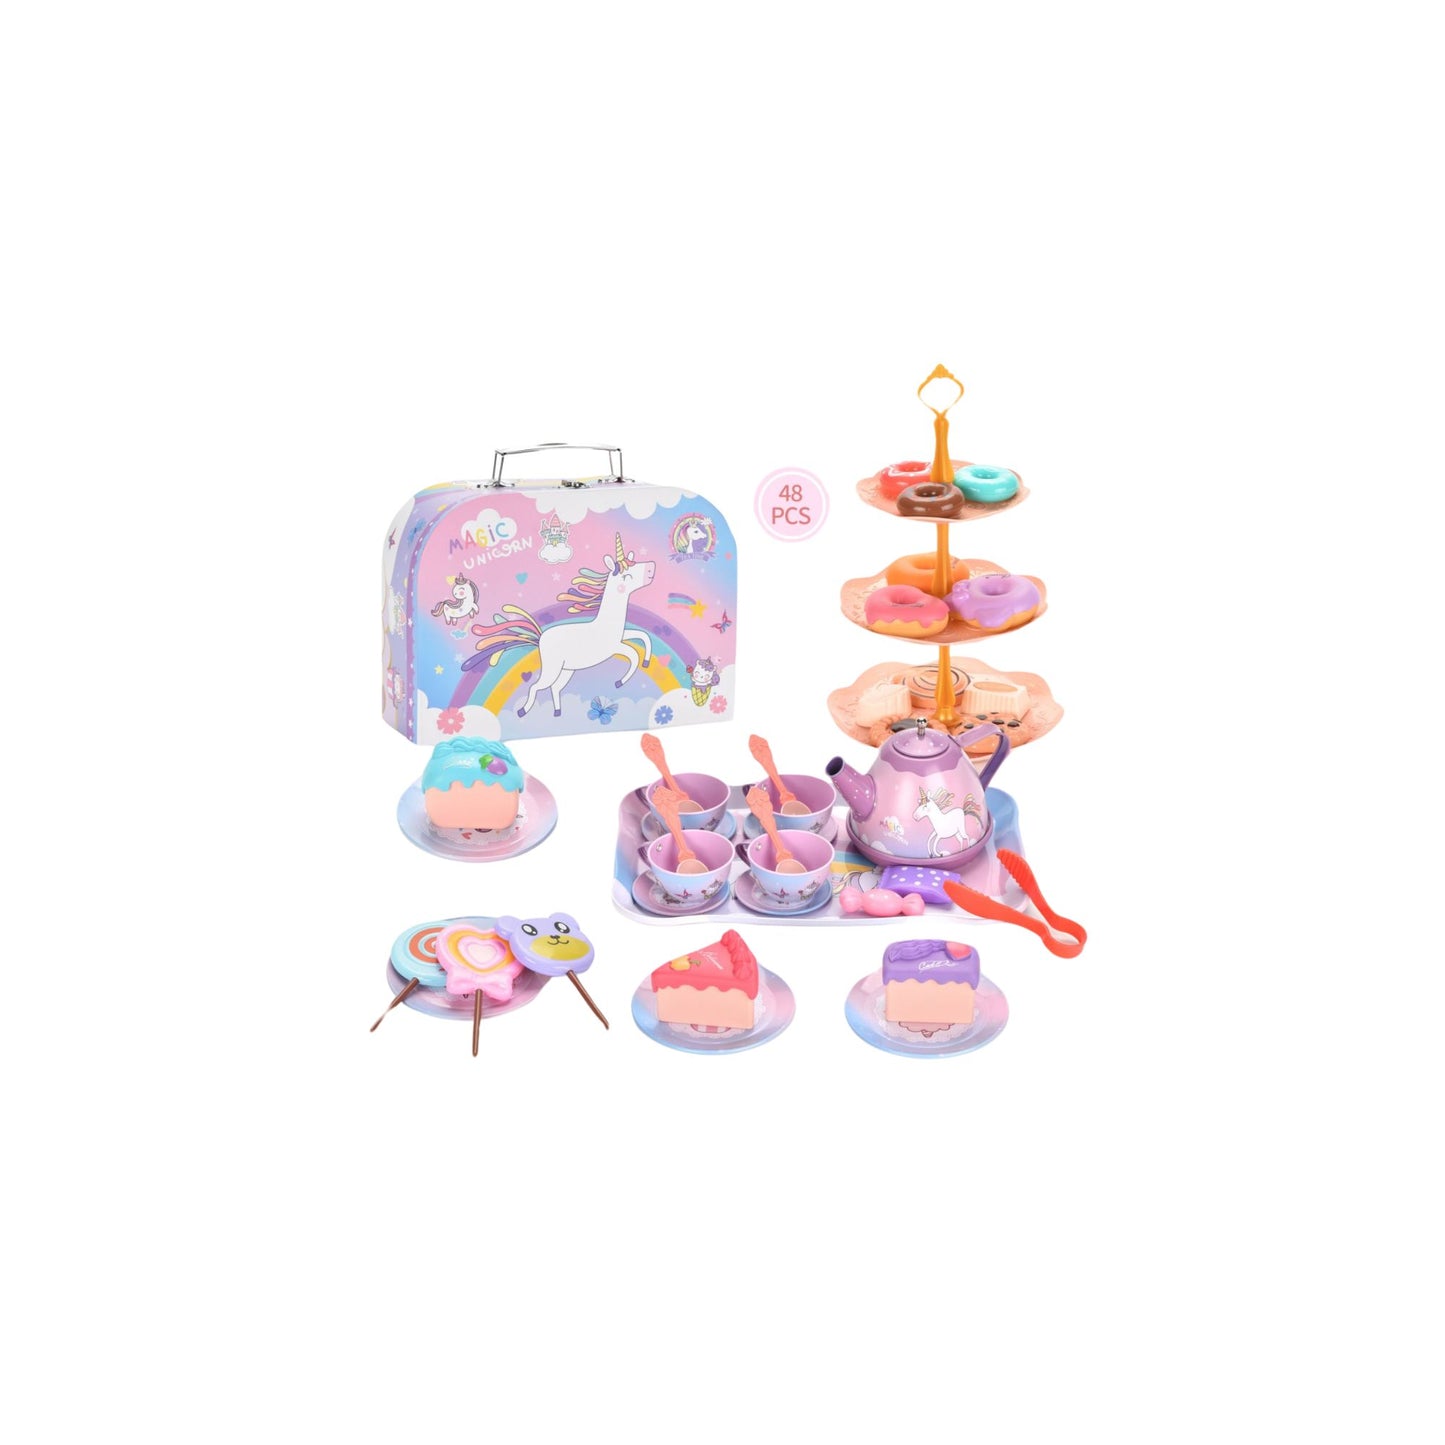 Little Fat Hugs Unicorn Tin Tea Set Toys Suitable for (2 years Up) I Develop creativity and social skills, Perfect pretend tea party, Stored in a unicorn case, Non-toxic, and Made of durable tin-coated iron